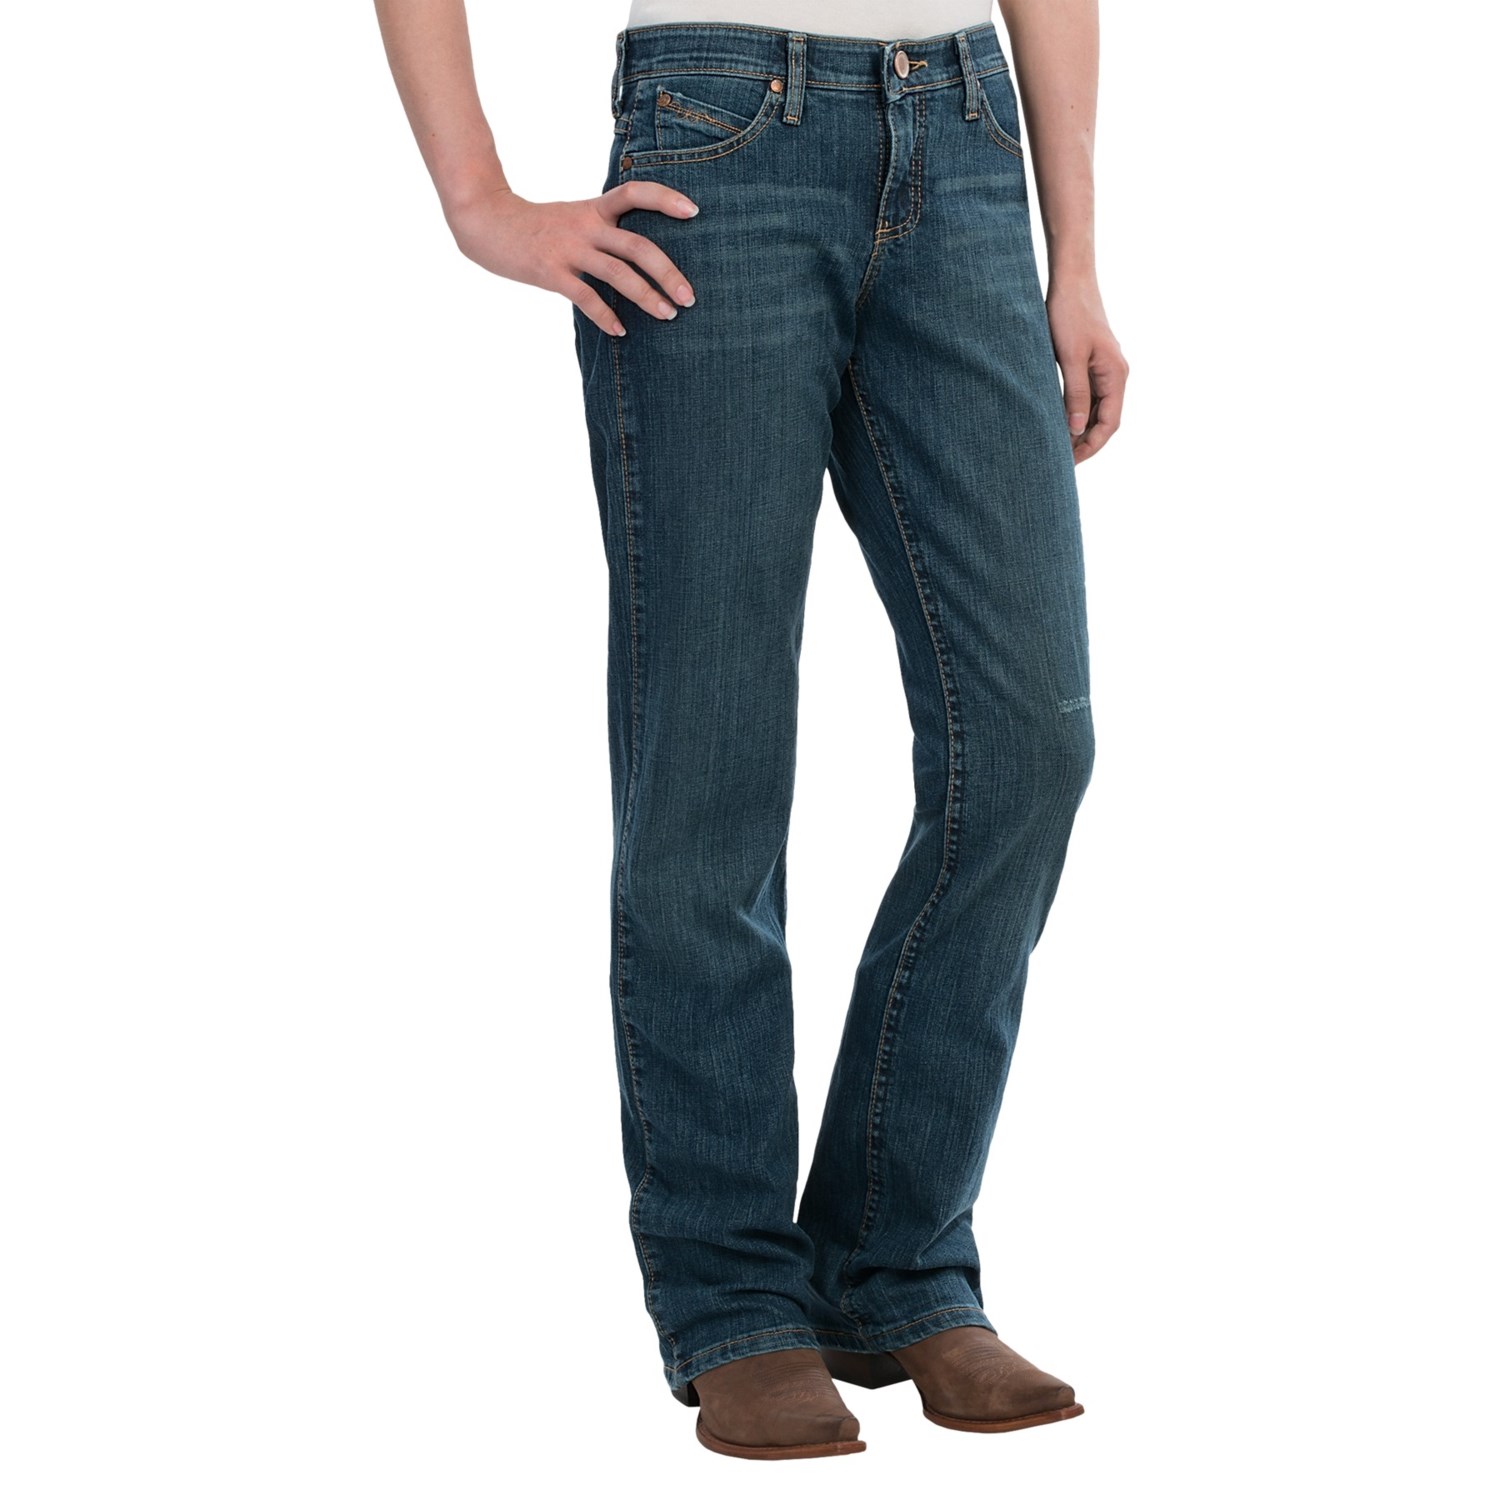 Wrangler Q-Baby Ultimate Riding Jeans (For Women) - Save 57%